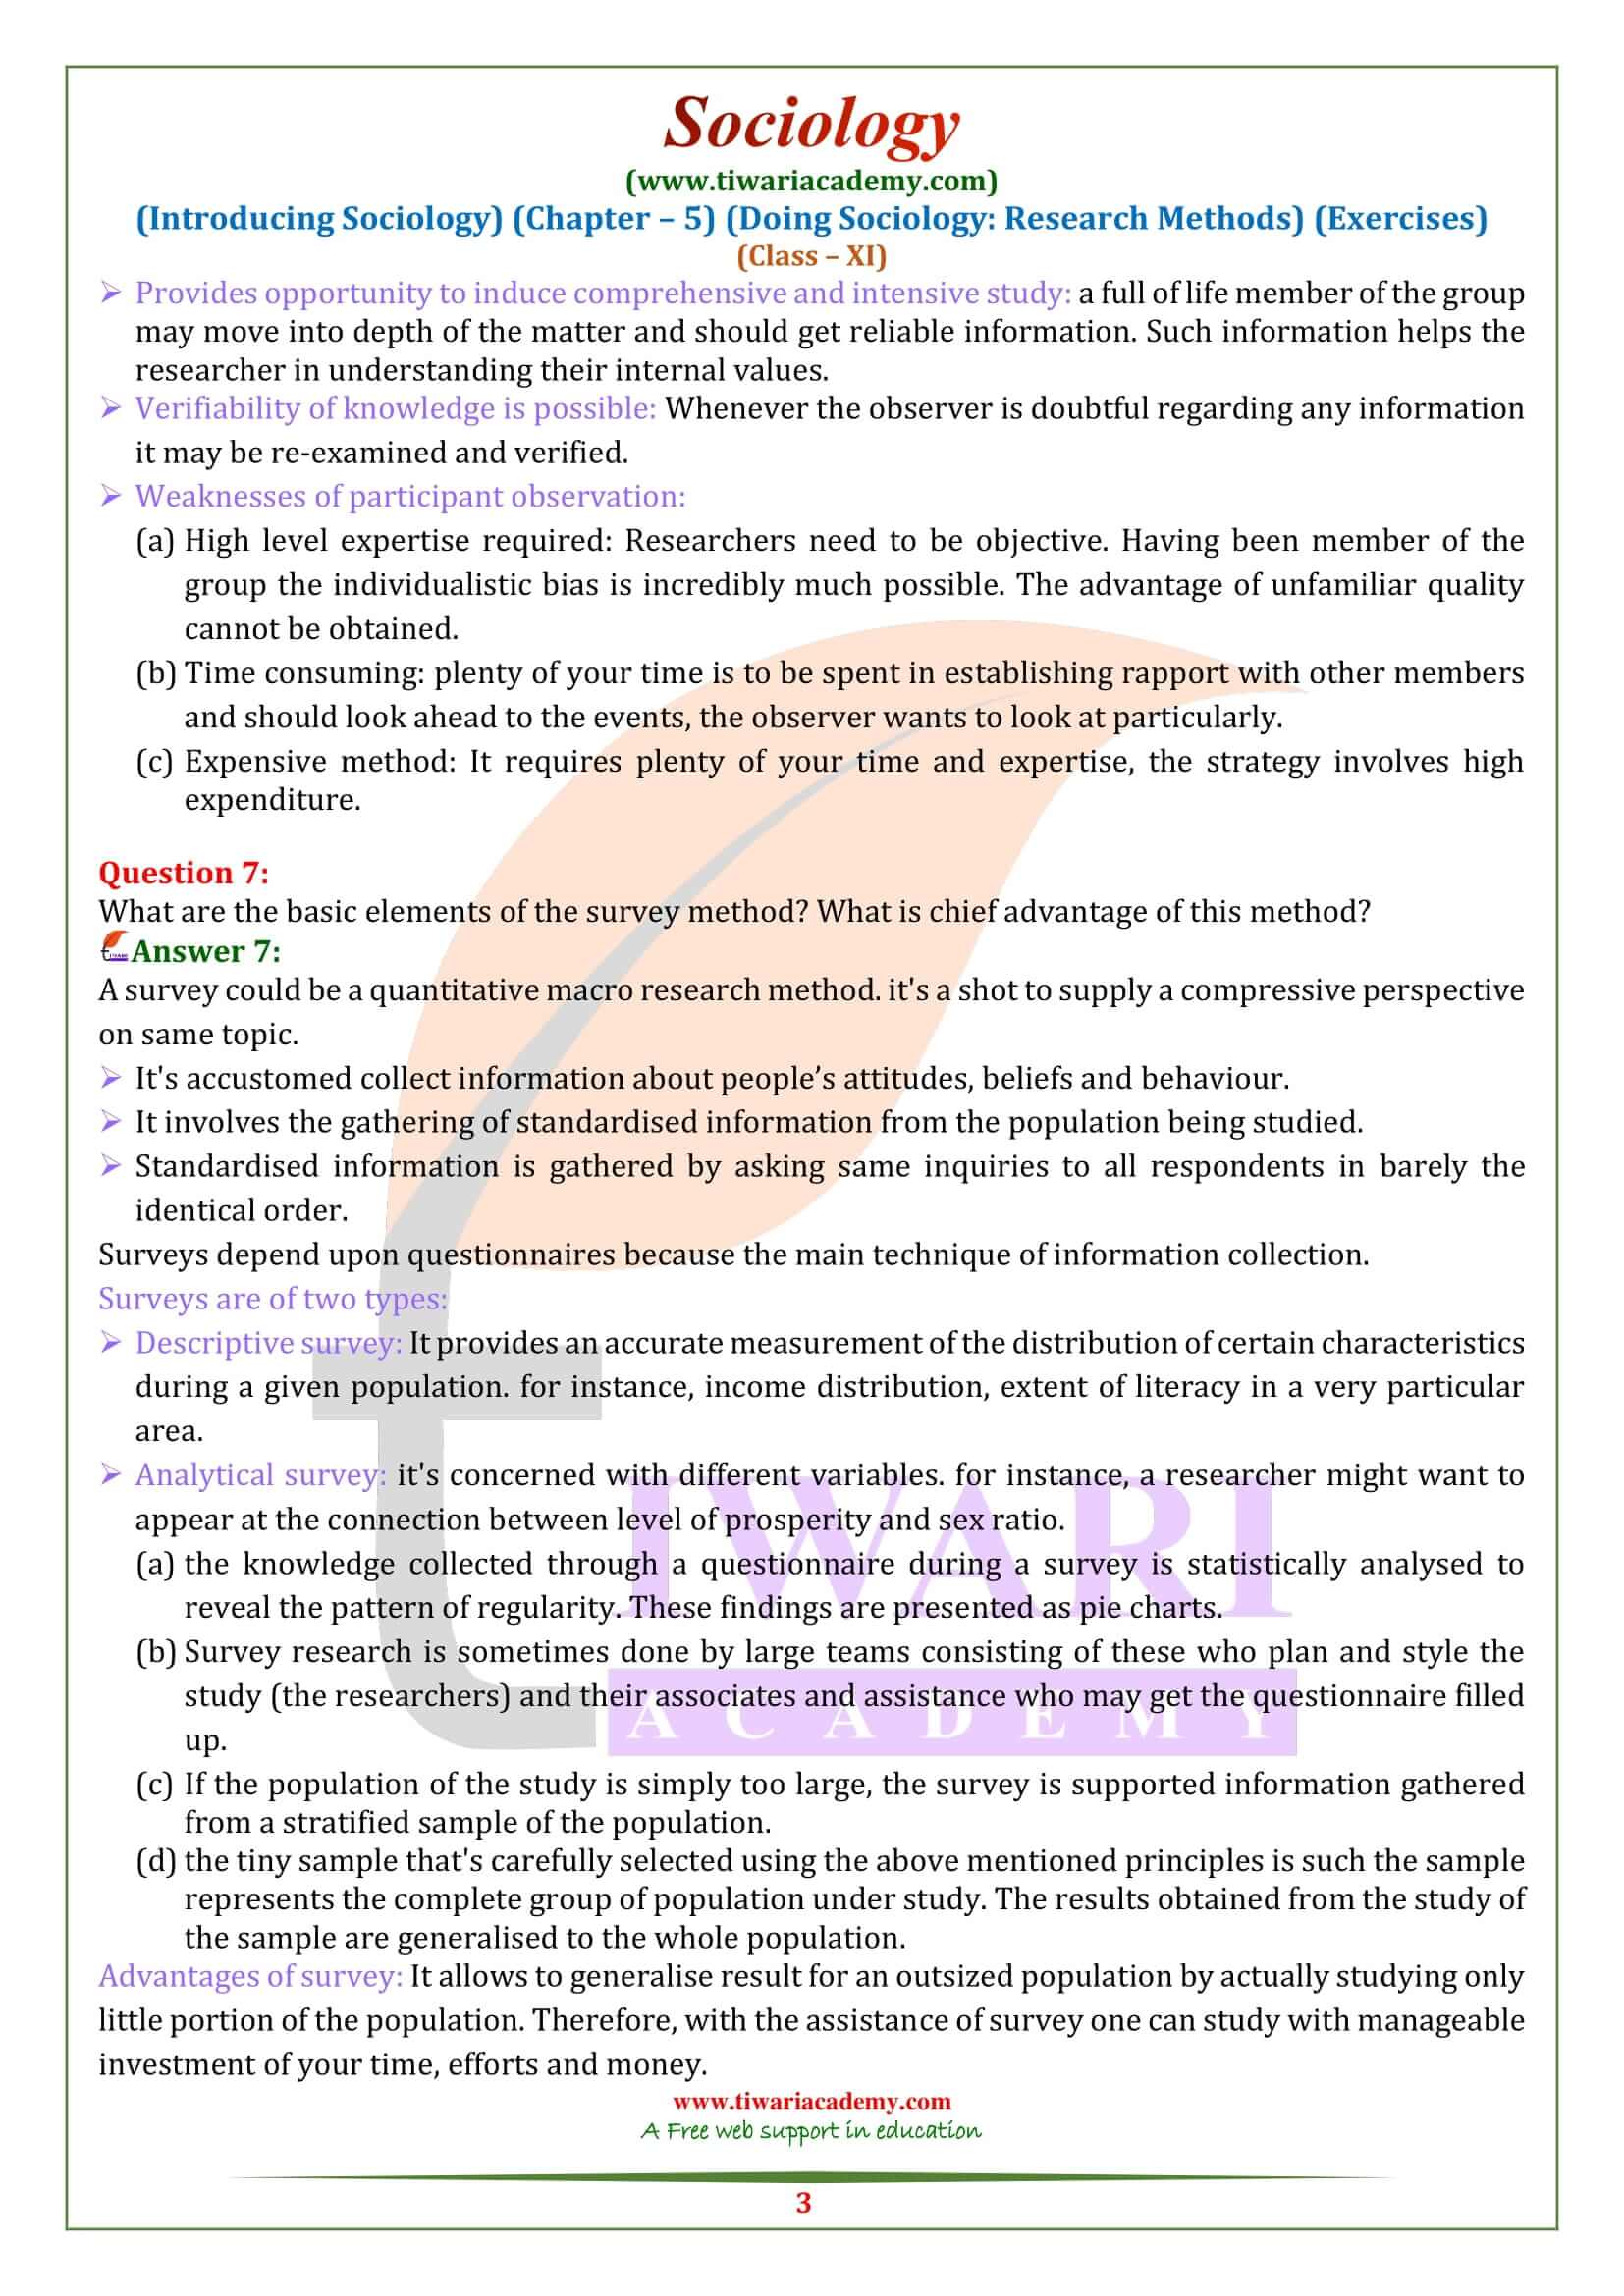 NCERT Solutions for Class 11 Sociology Chapter 5 Question Answers